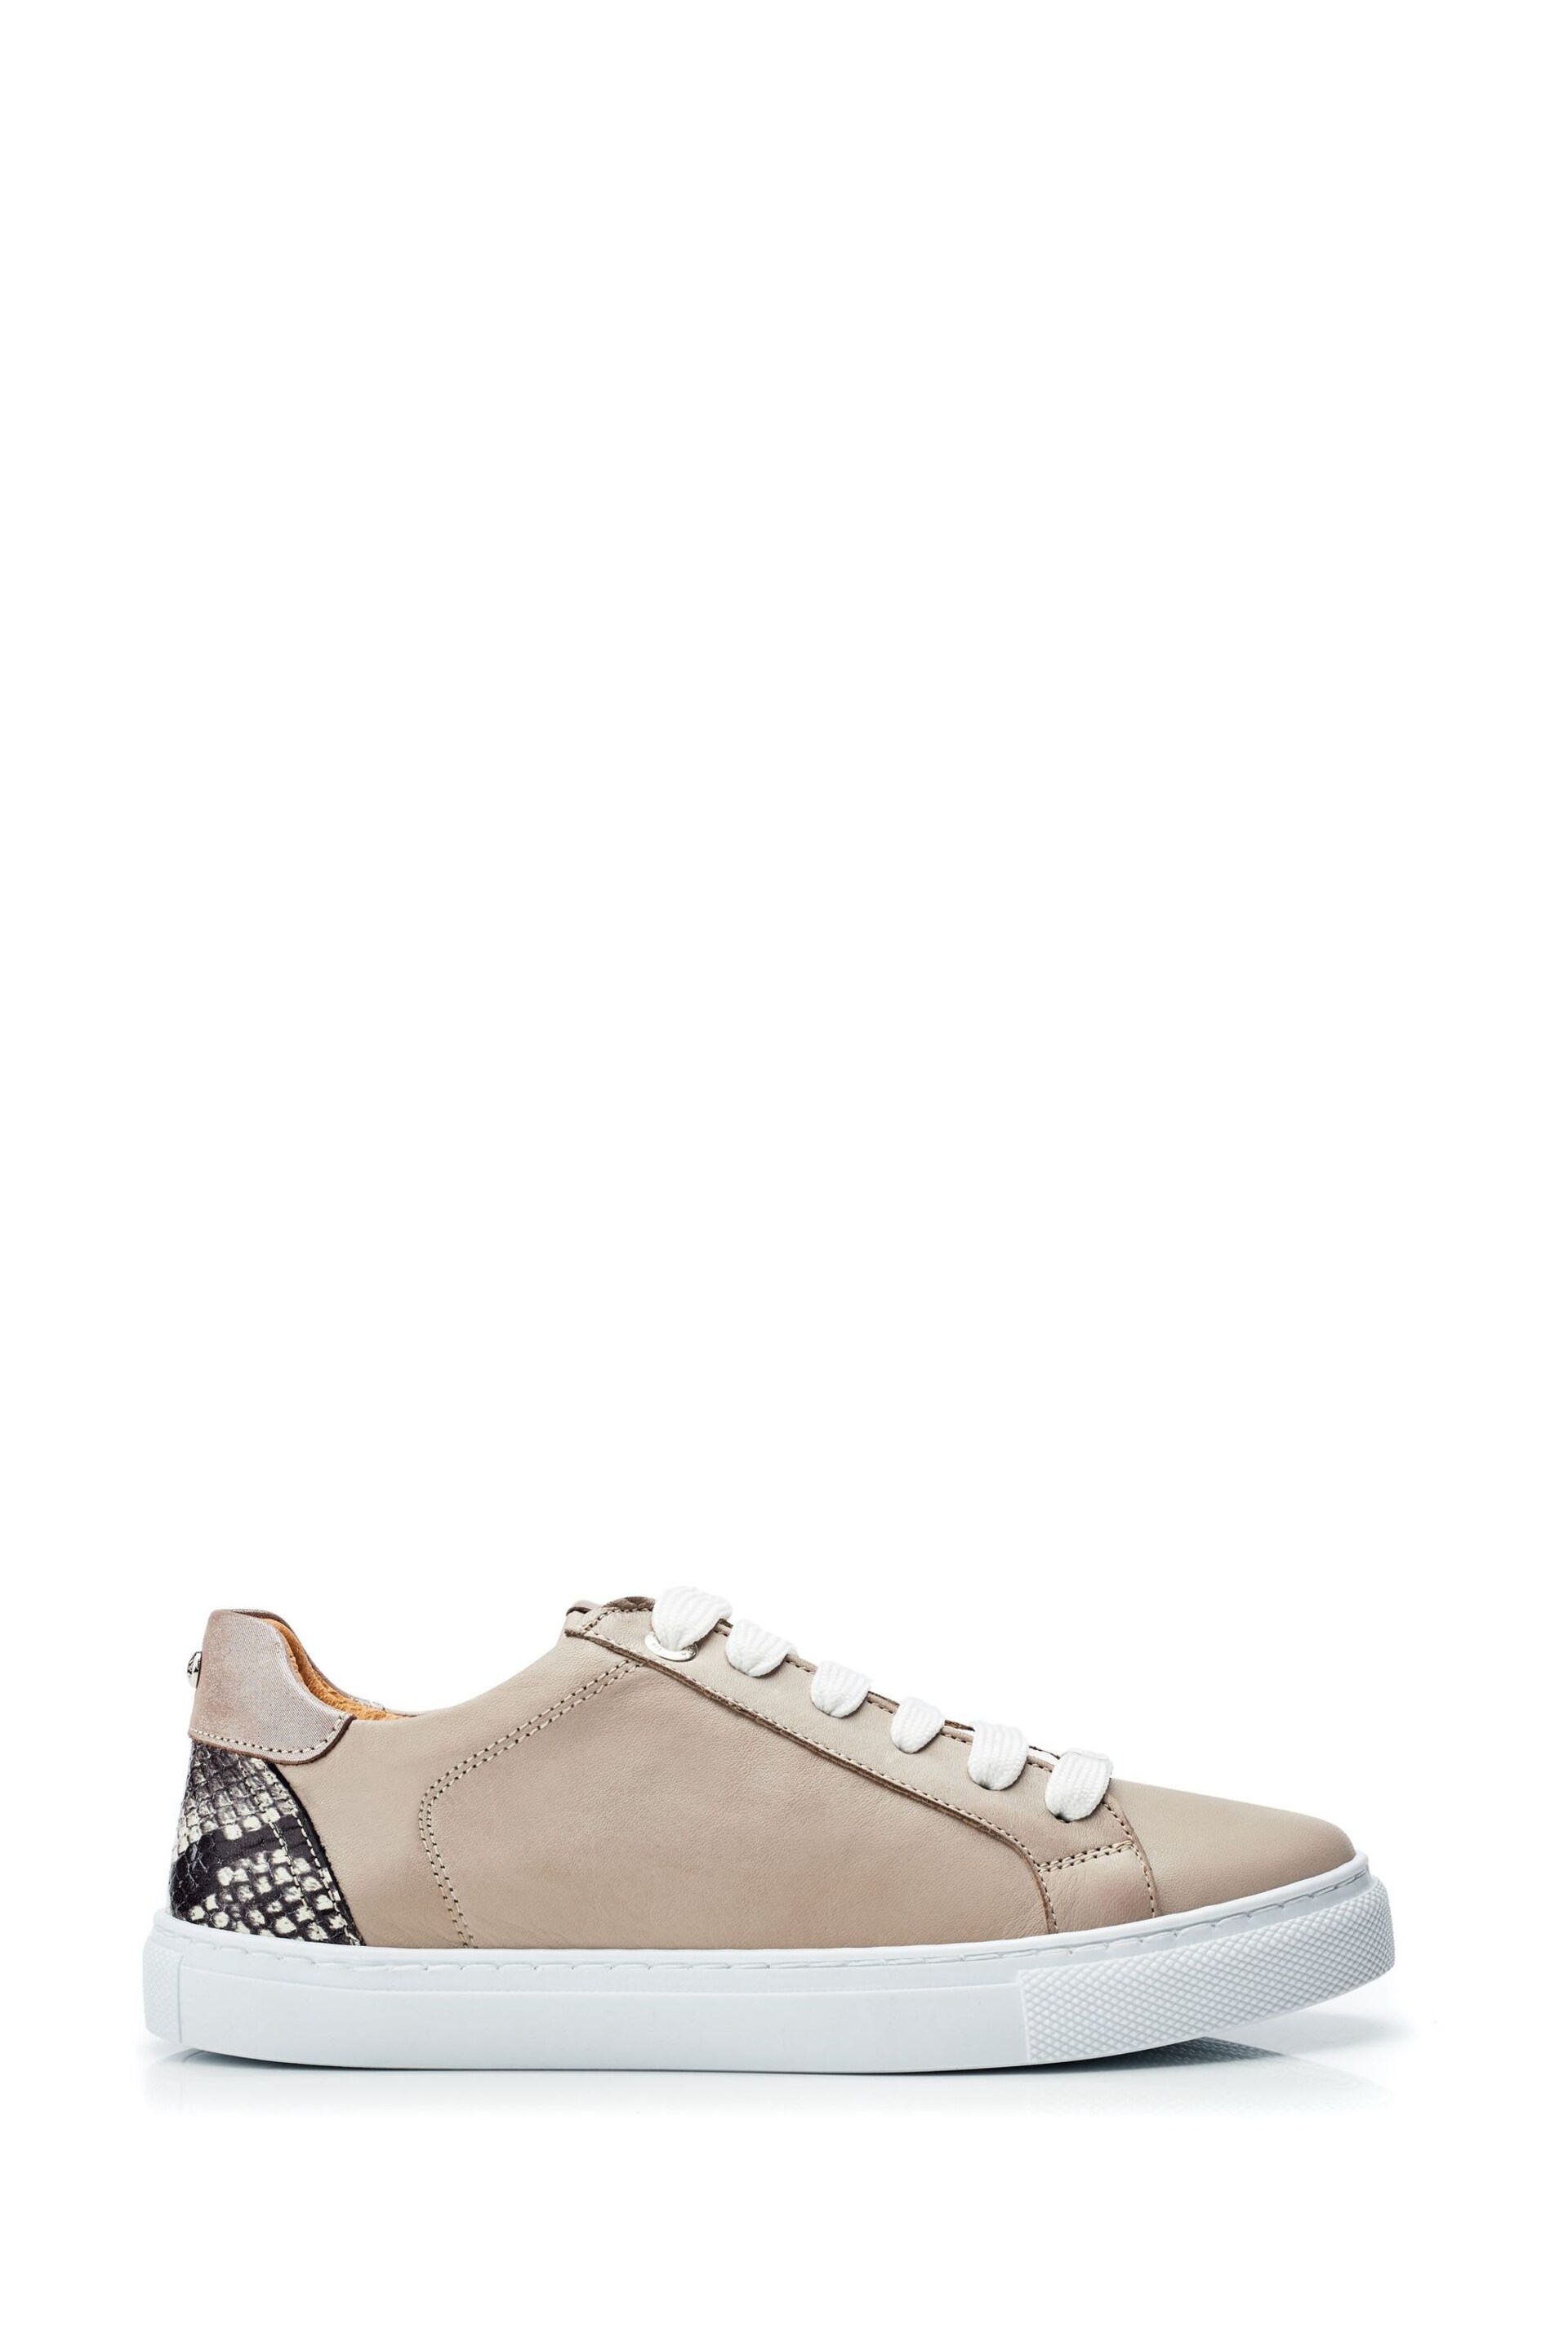 Moda in Pelle Slim Natural Braidie Sole Lace-Up Trainers - Image 1 of 4